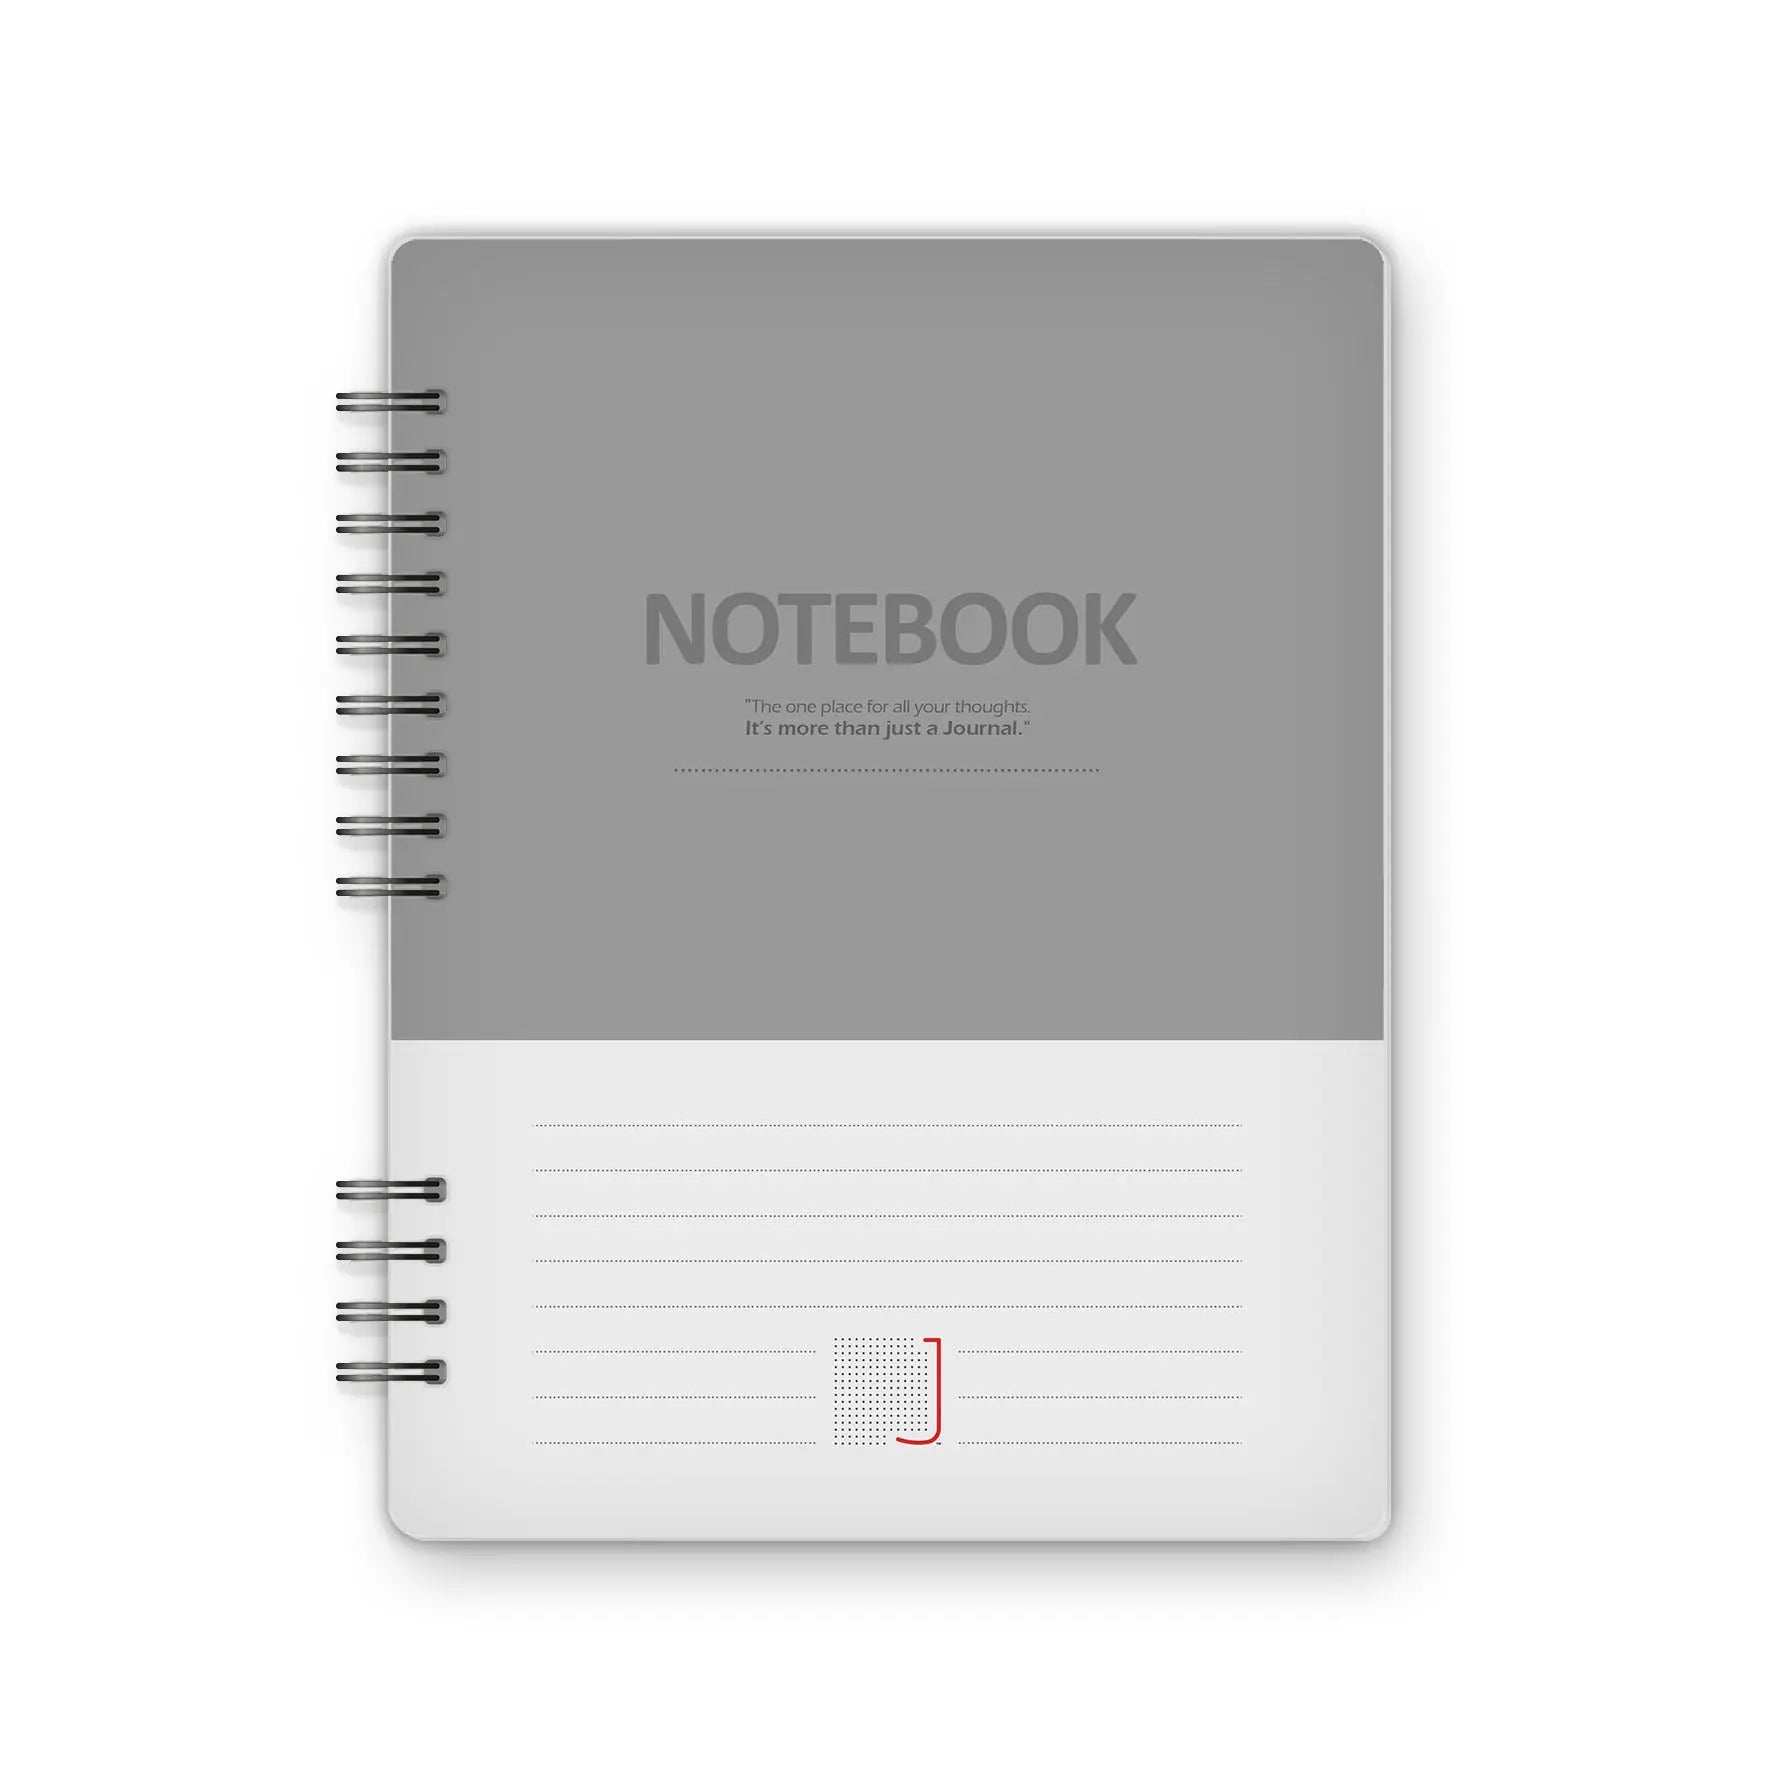 Notebook - 18X14 cm - 75 Sheets | Grey - from Journals